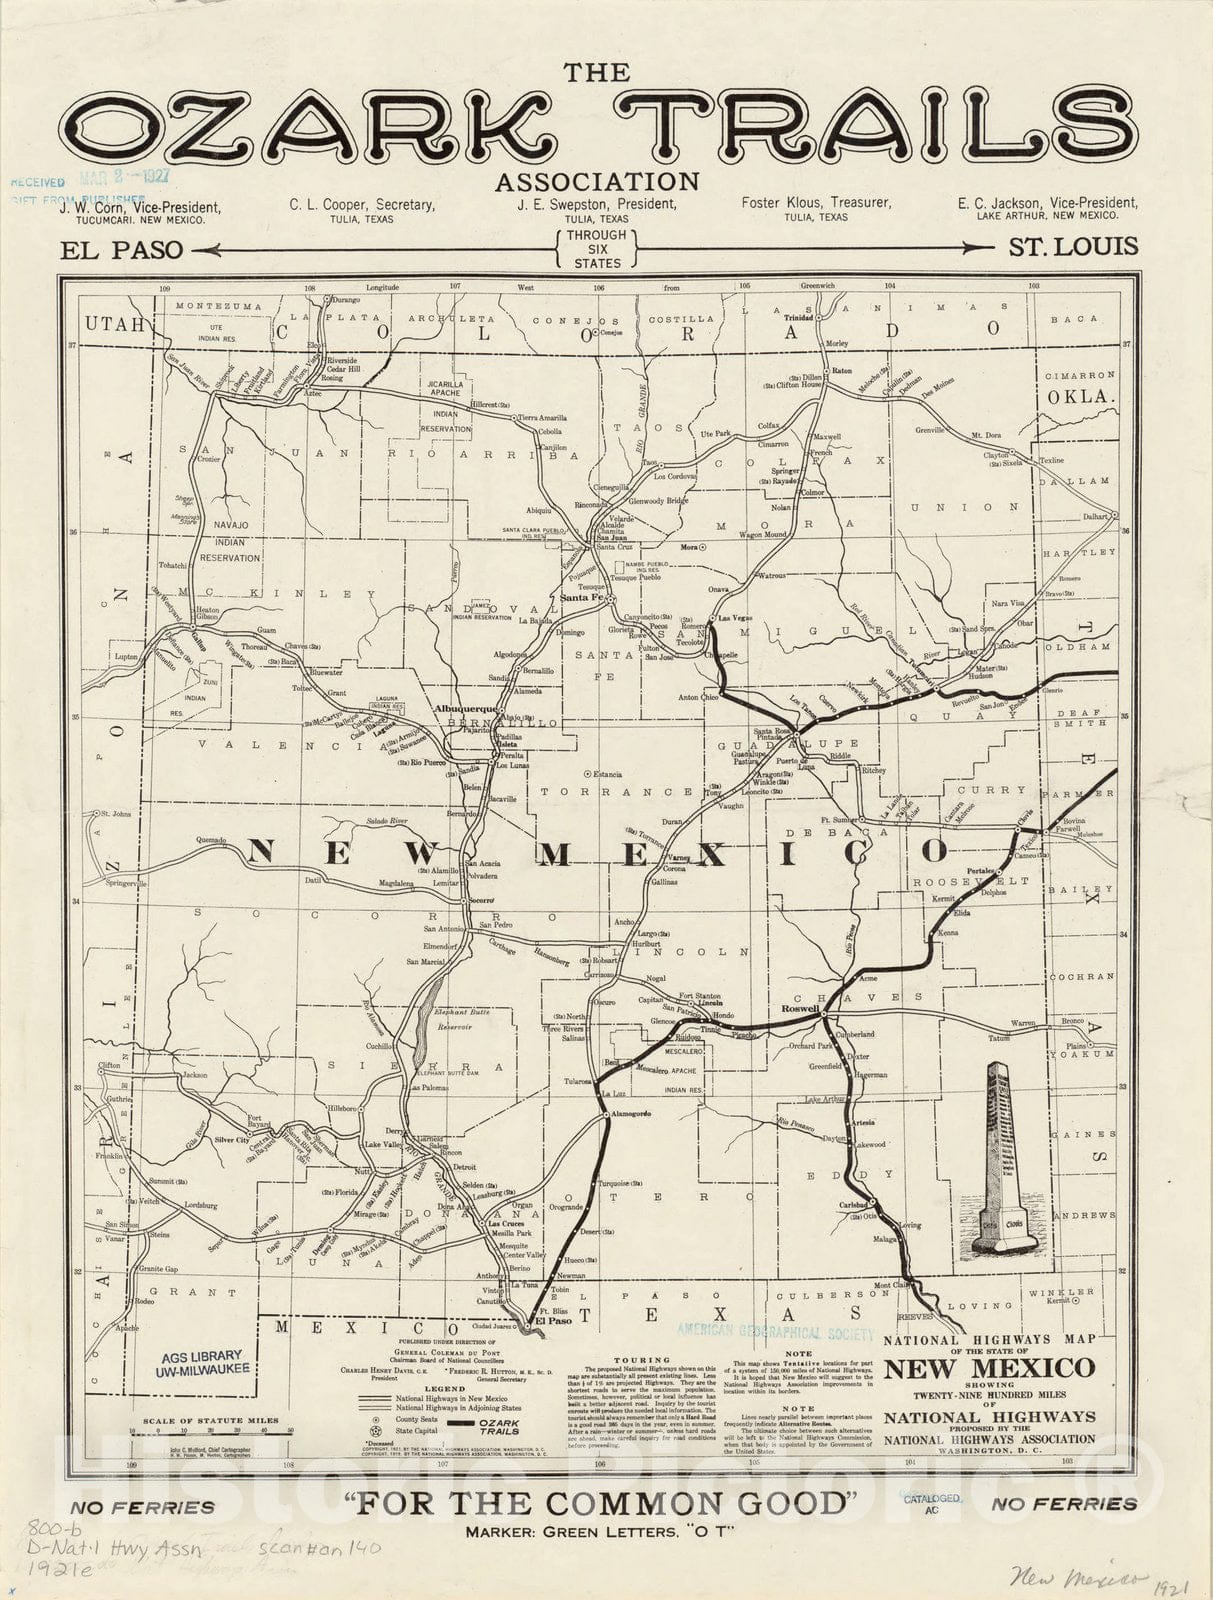 Map : New Mexico 1921 1, National highways map of the state of New Mexico : showing twenty-nine hundred miles of national highways, Antique Vintage Reproduction